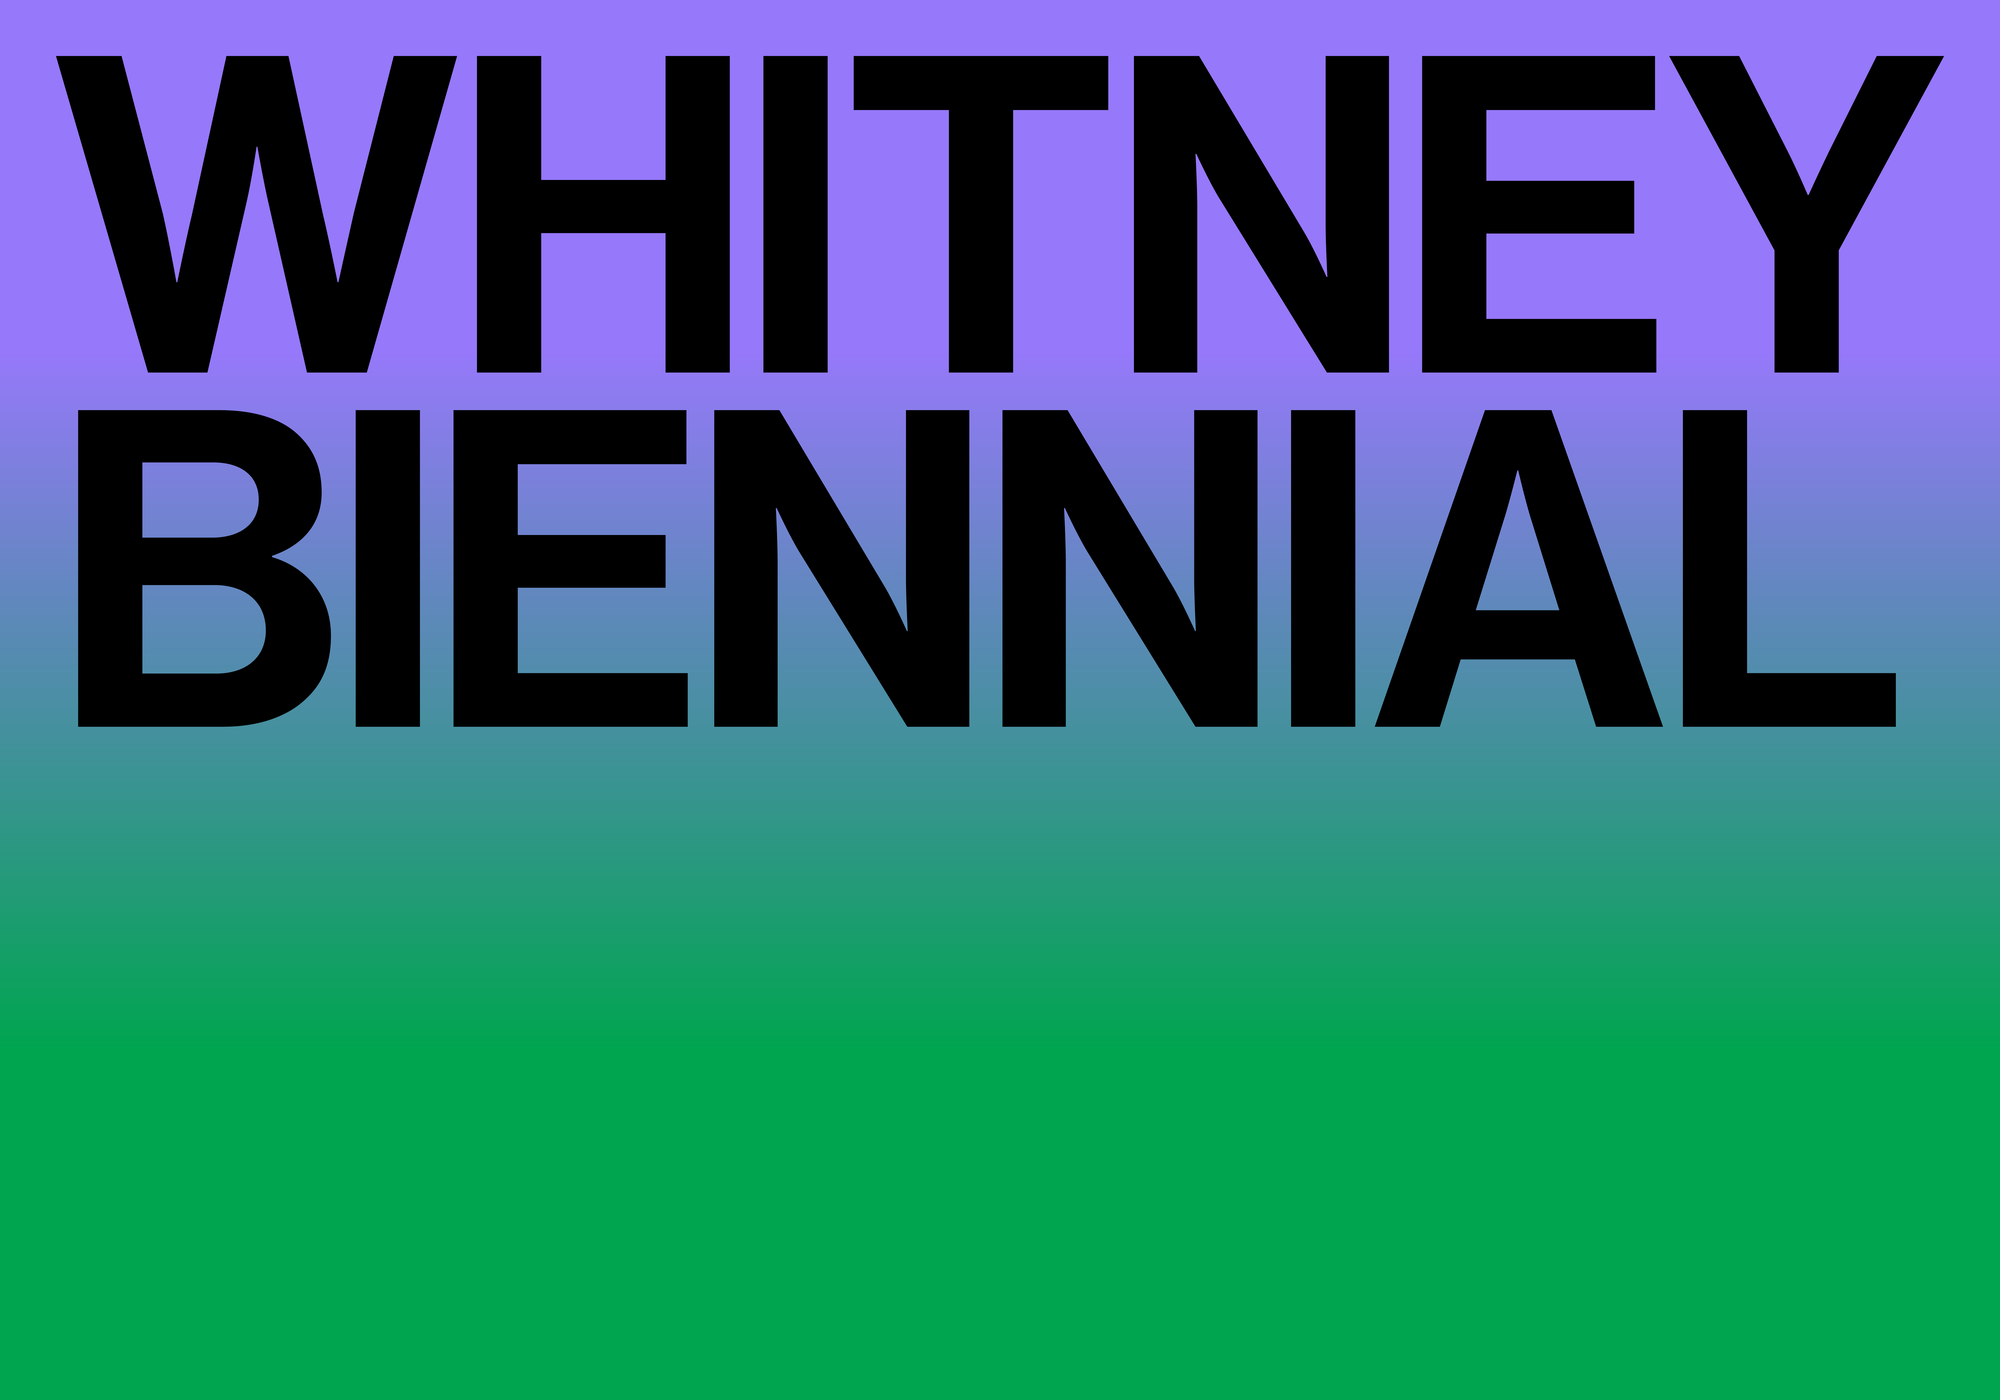 Purple into green gradient colors featuring Whitney Biennial in black text